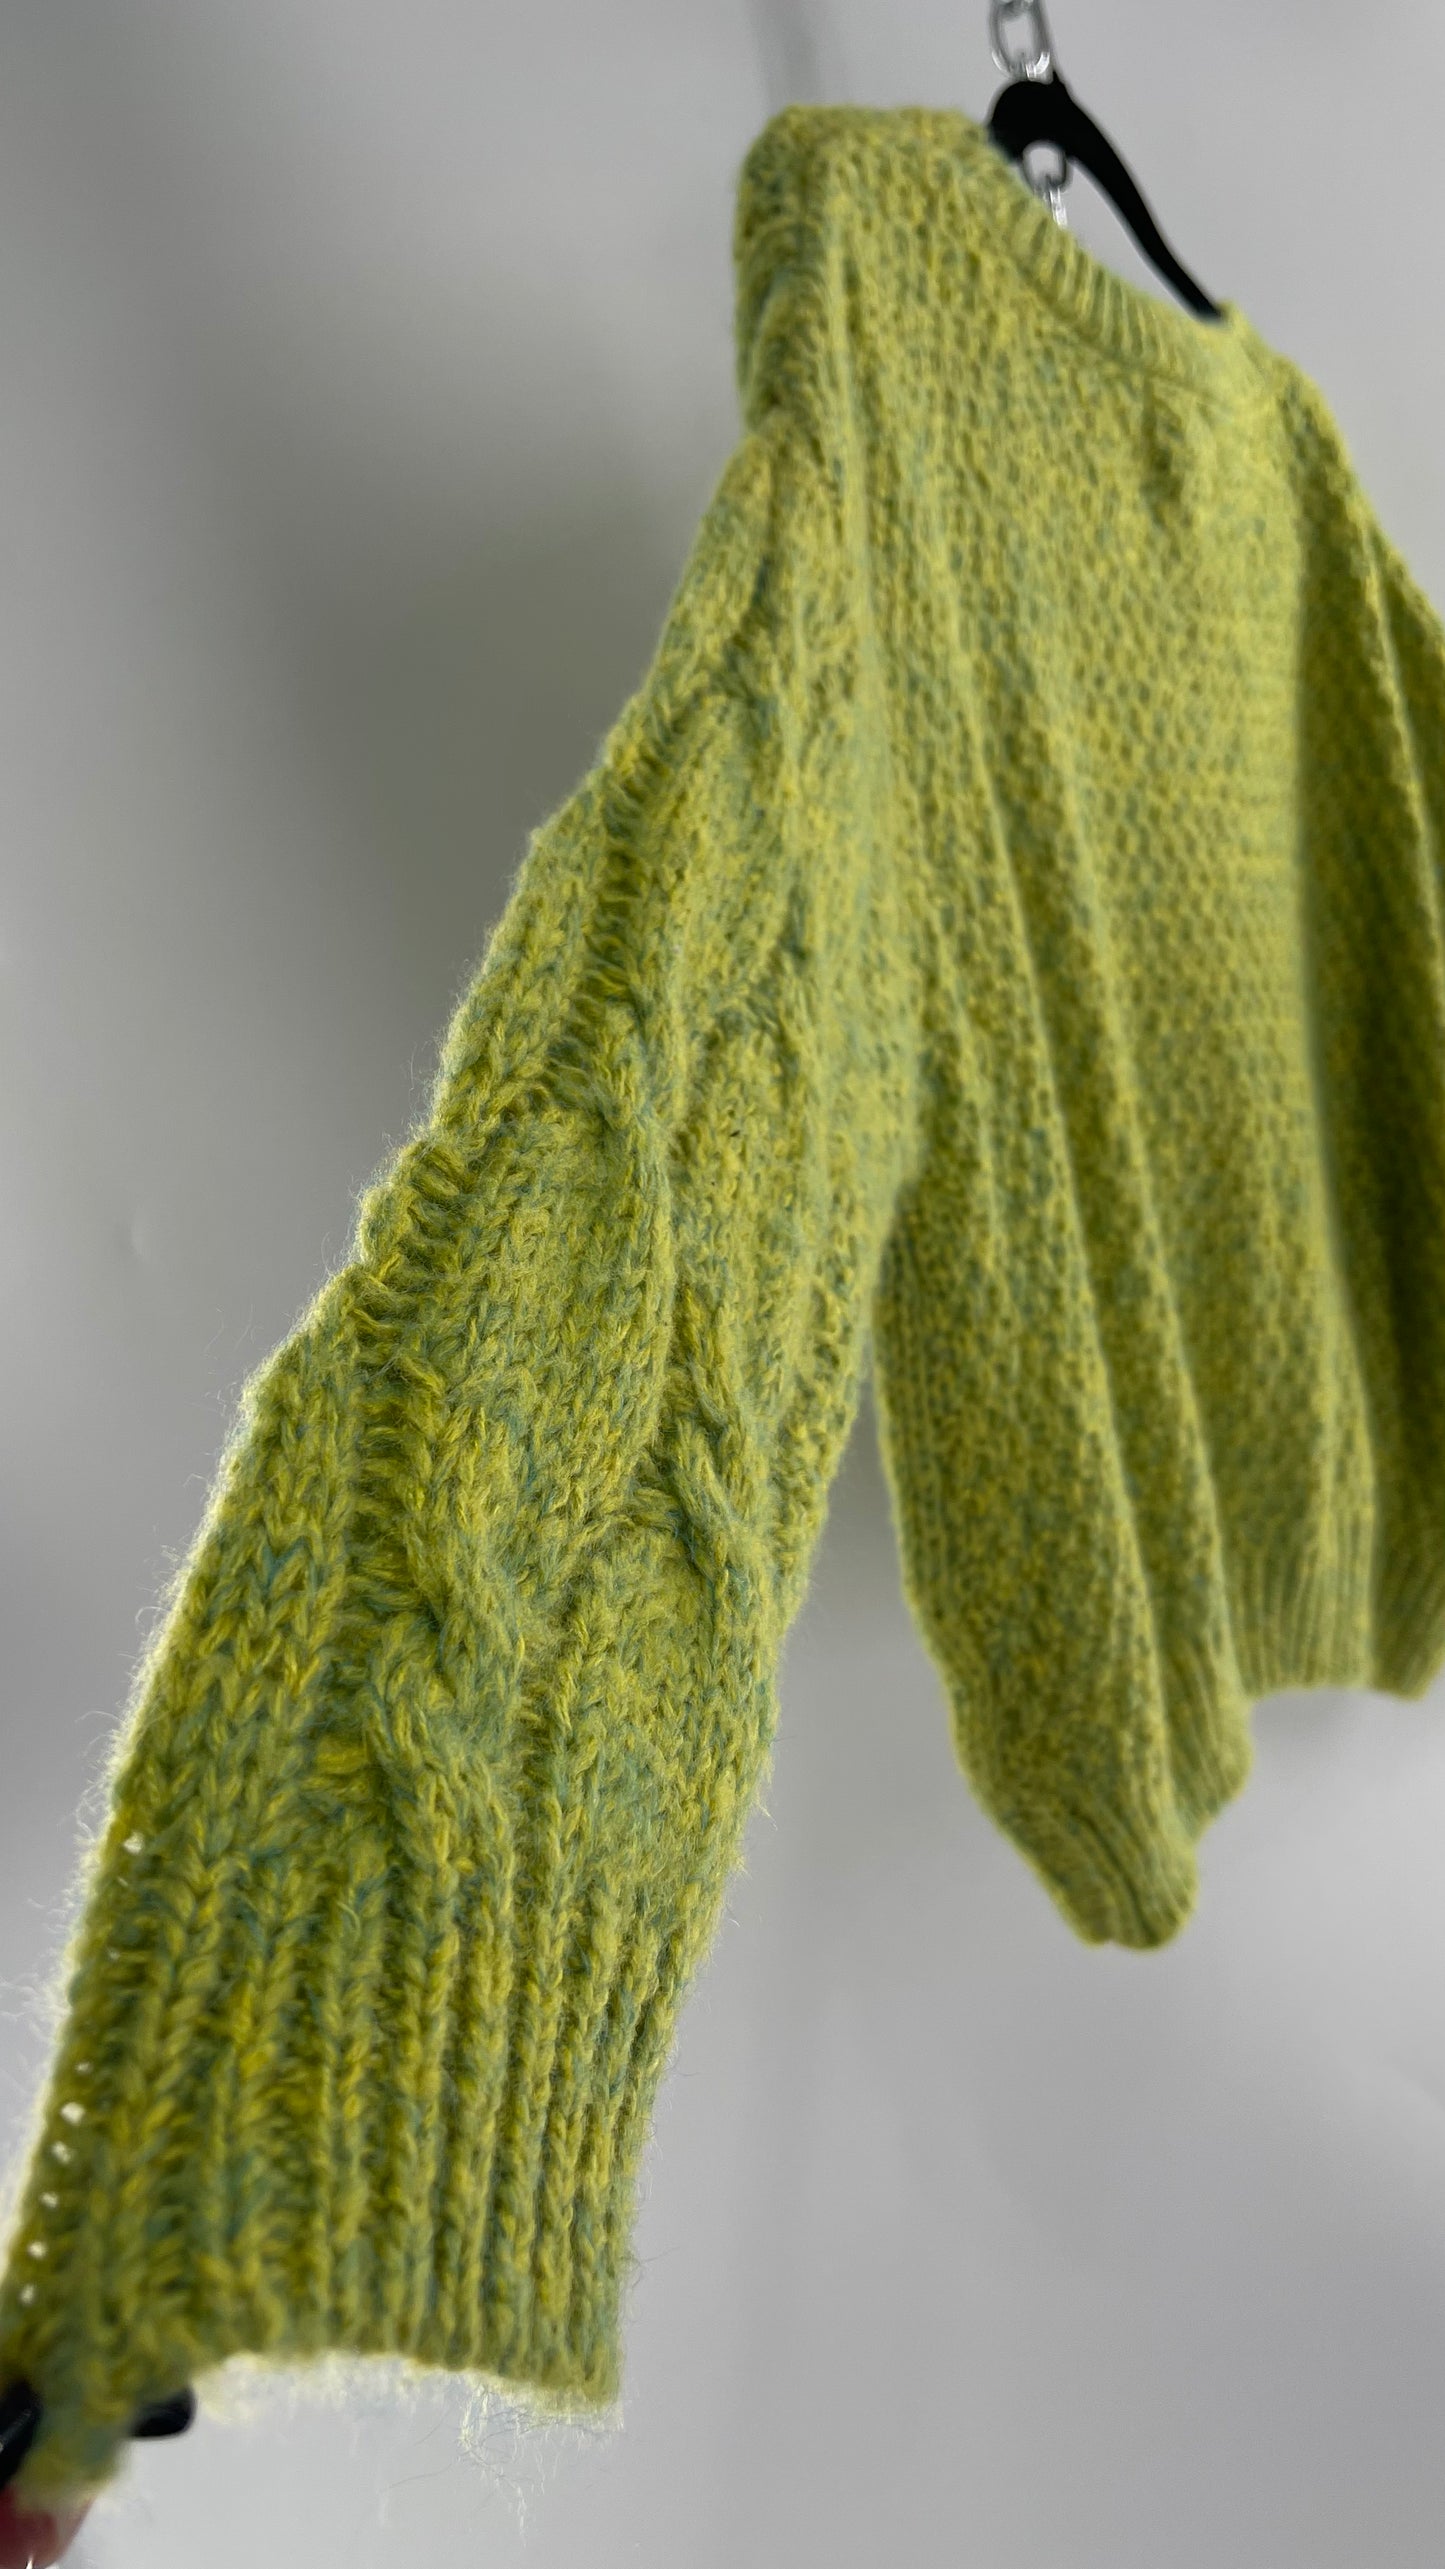 JOA Lime Green/Yellow Cableknit Sweater (S)